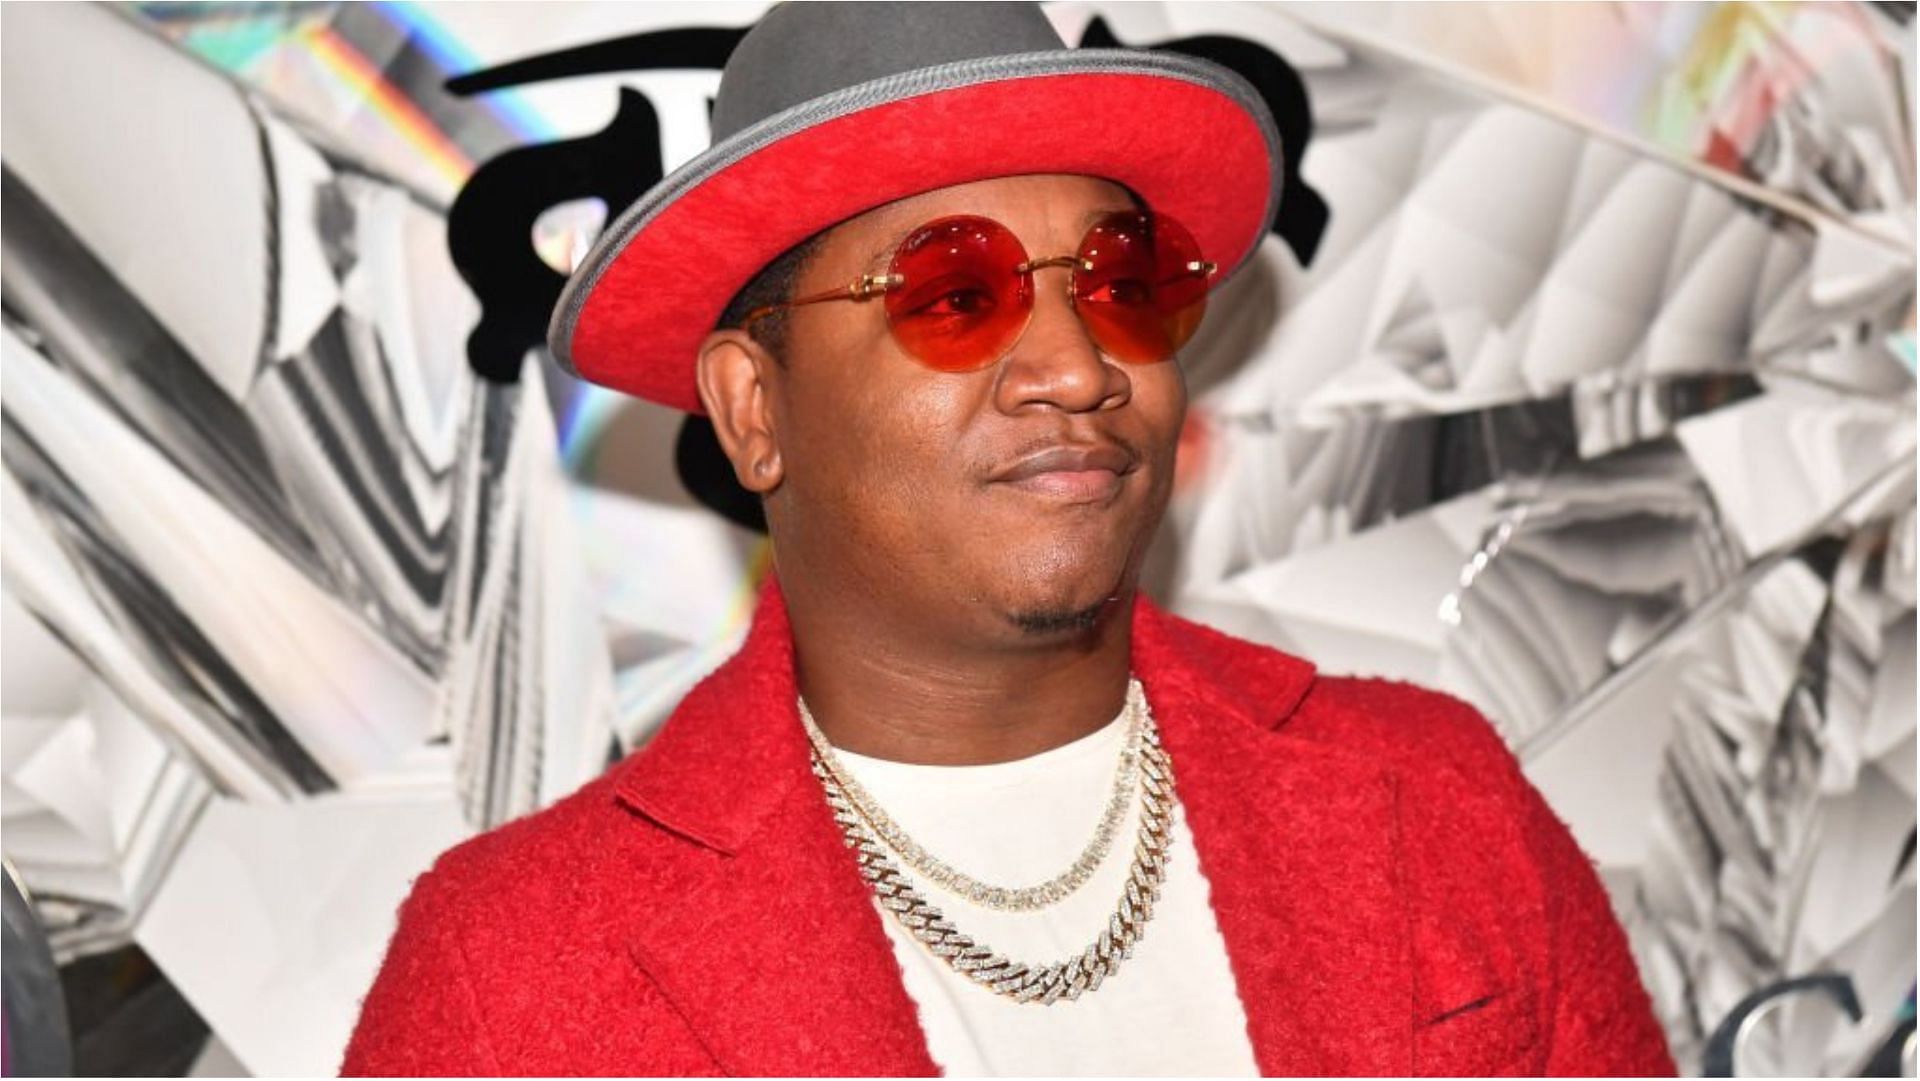 Yung Joc accumulated a lot of wealth from his career in the music industry (Image via Paras Griffin/Getty Images)